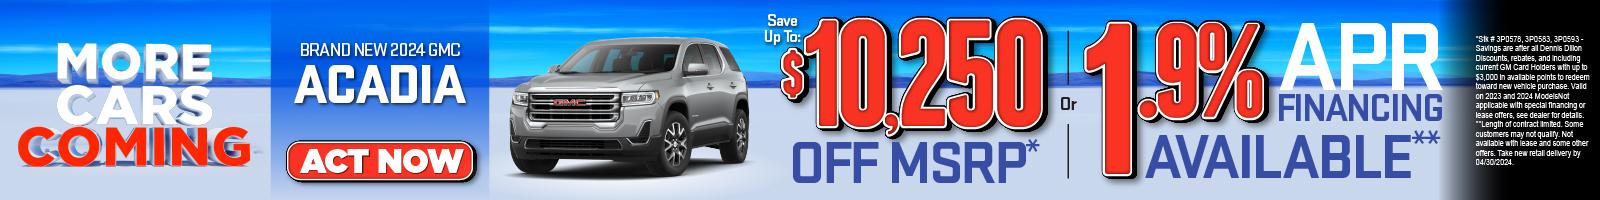 SAM - BRAND NEW 2024 GMC ACADIA | Save up to $10,250 Off MSRP* or 1.9% APR financing available**